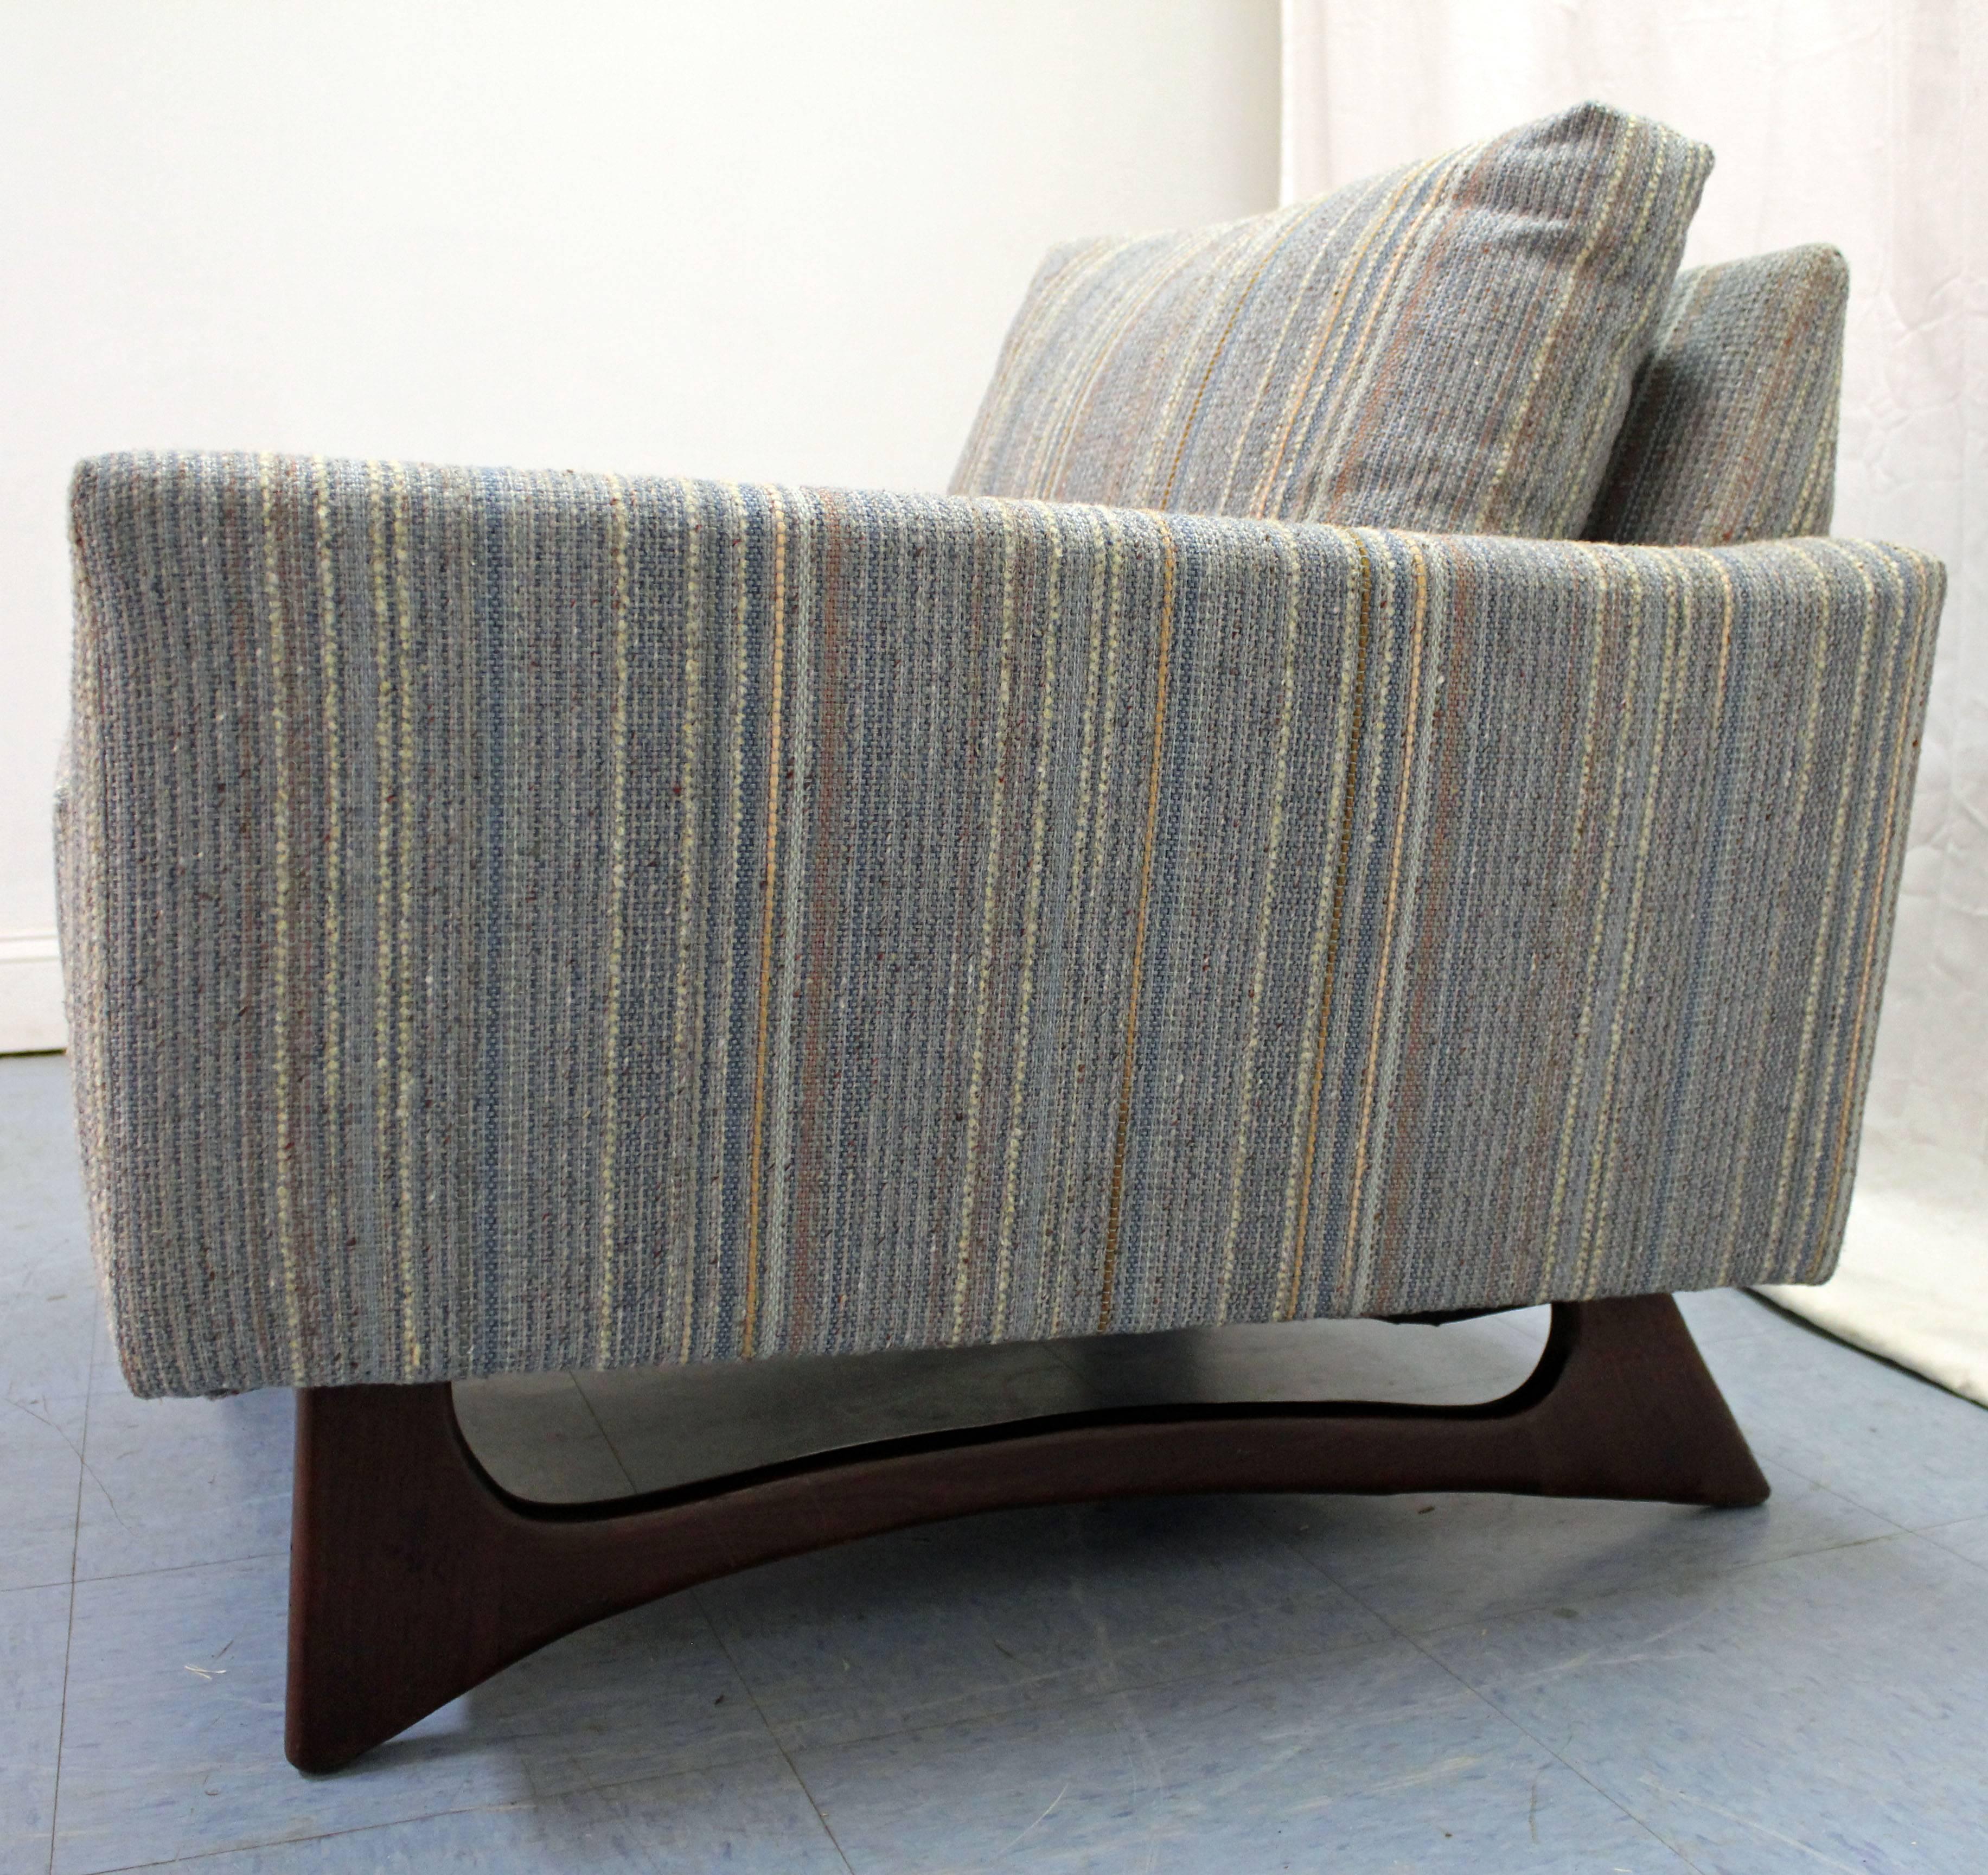 Upholstery Mid-Century Modern Adrian Pearsall for Craft Associates Club Chair 2406